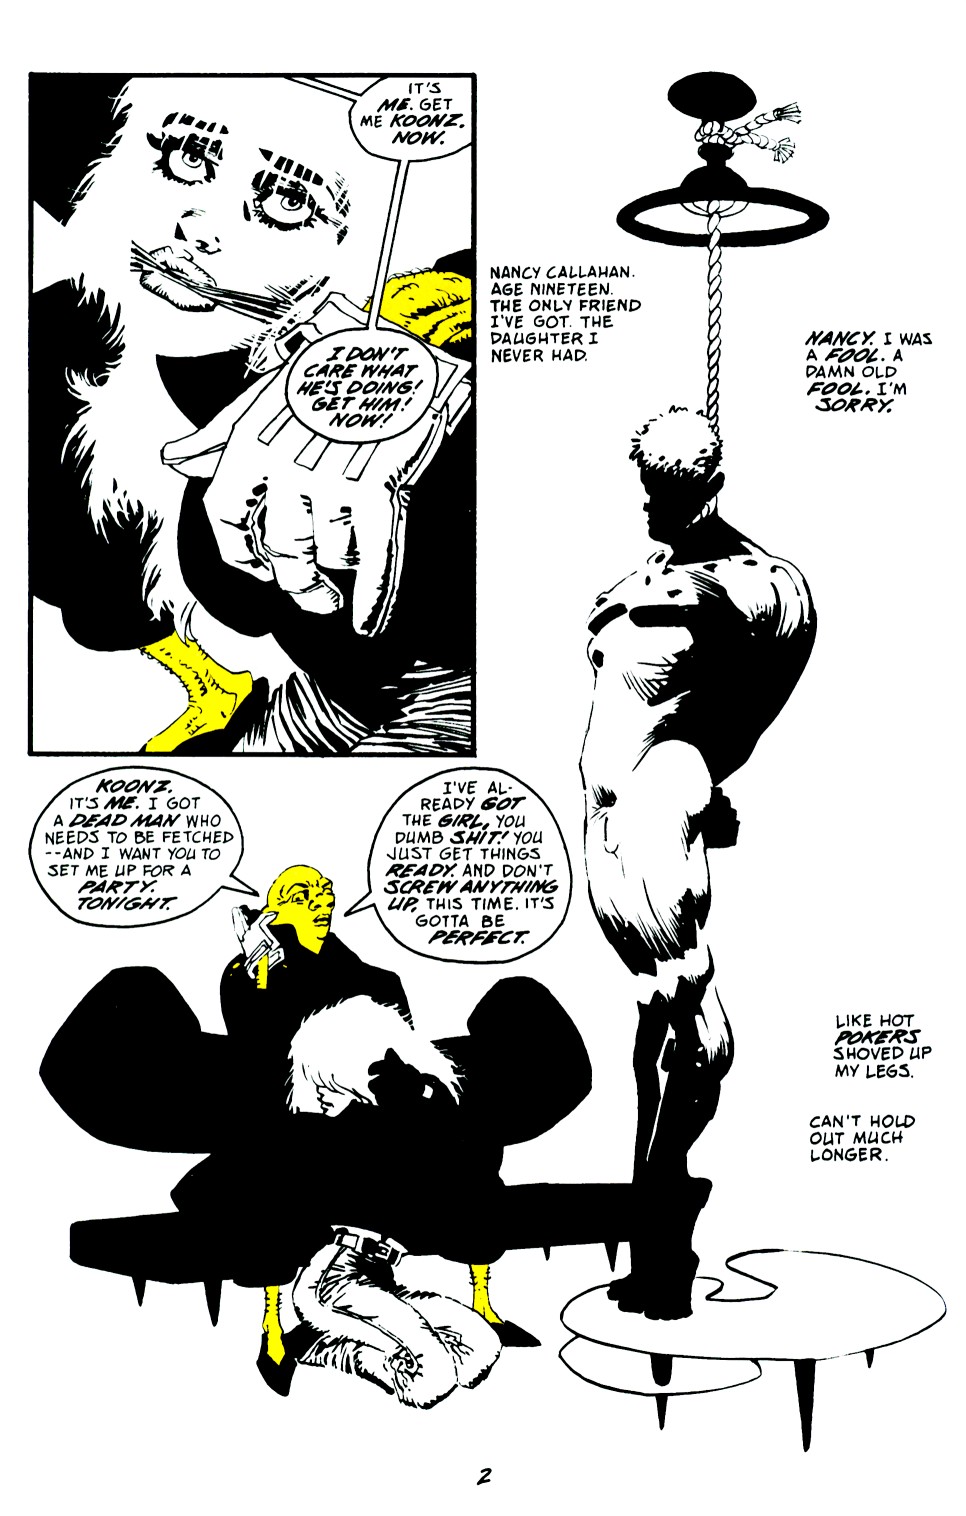 Sin City: That Yellow Bastard 6 of 6 - A